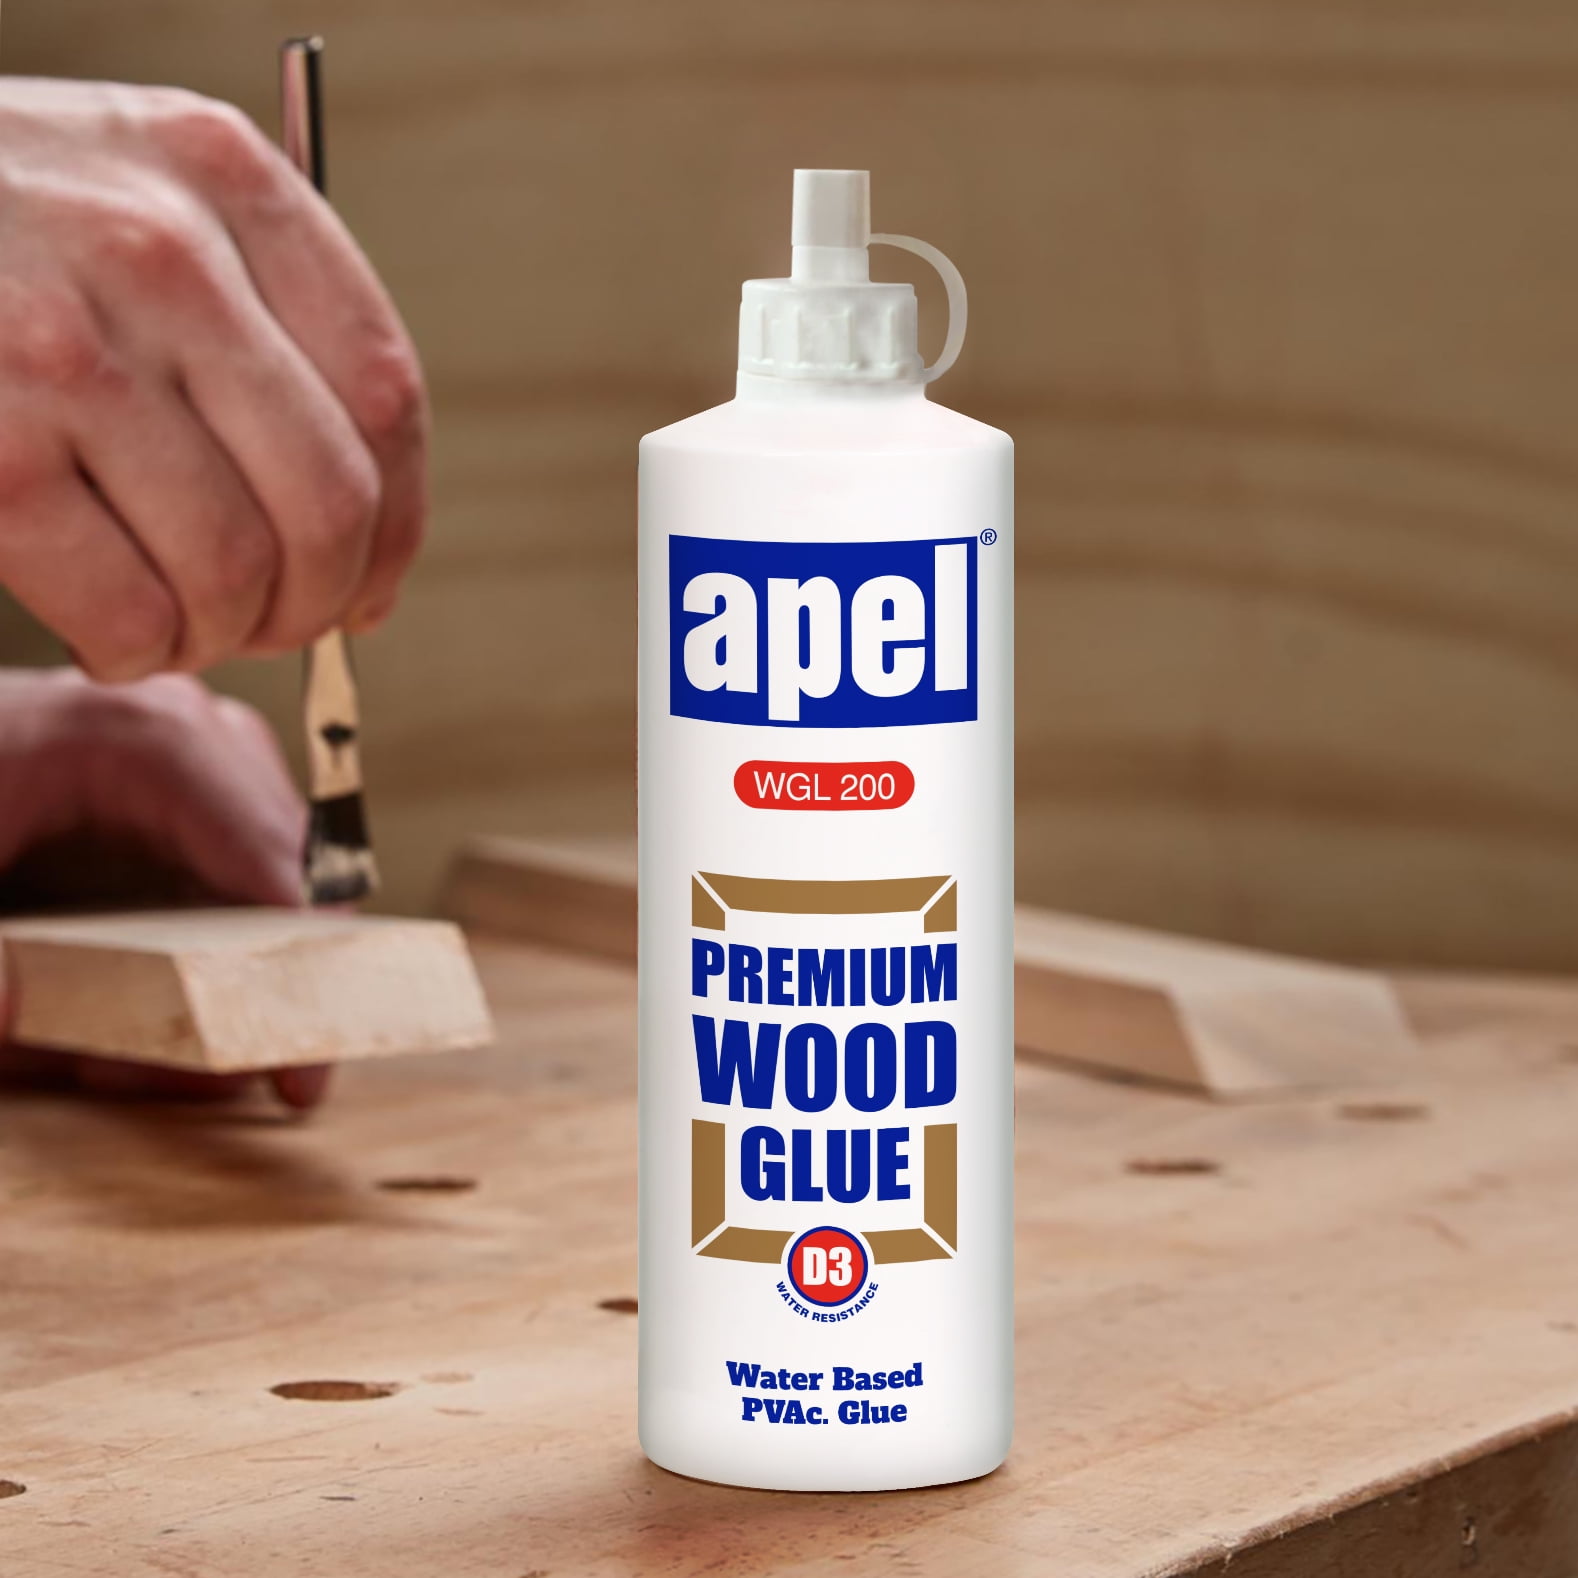 Wood Glue For Woodworking And Hobbies, Extra Strength For Crafts, 32 oz./2  pound, Water Based Clear PVA Glue For Interior & Exterior, Low Viscosity (2